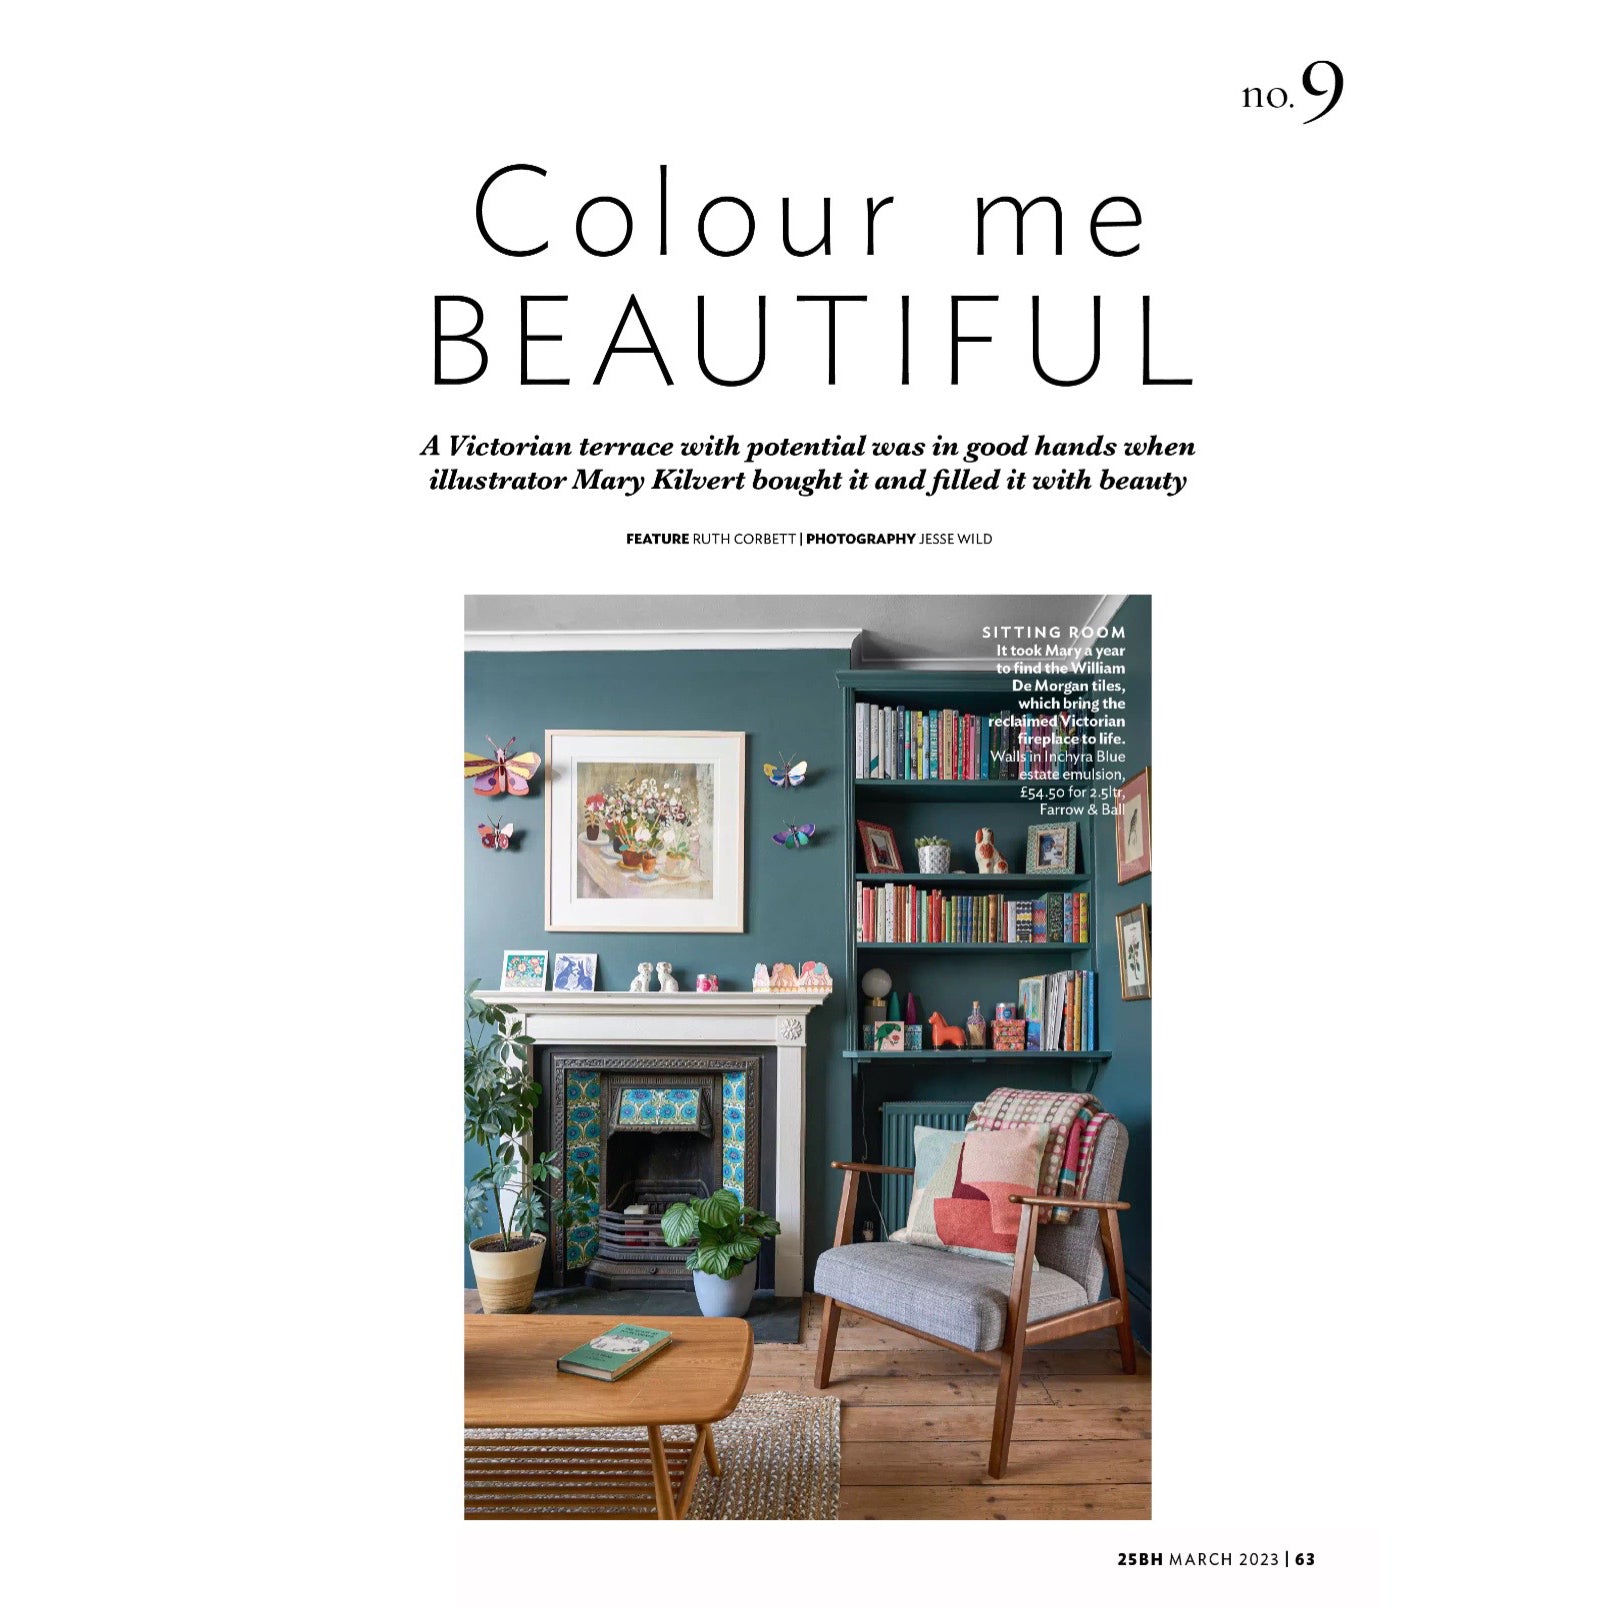 25 Beautiful Homes magazine feature showing Mary Kilvert's living room